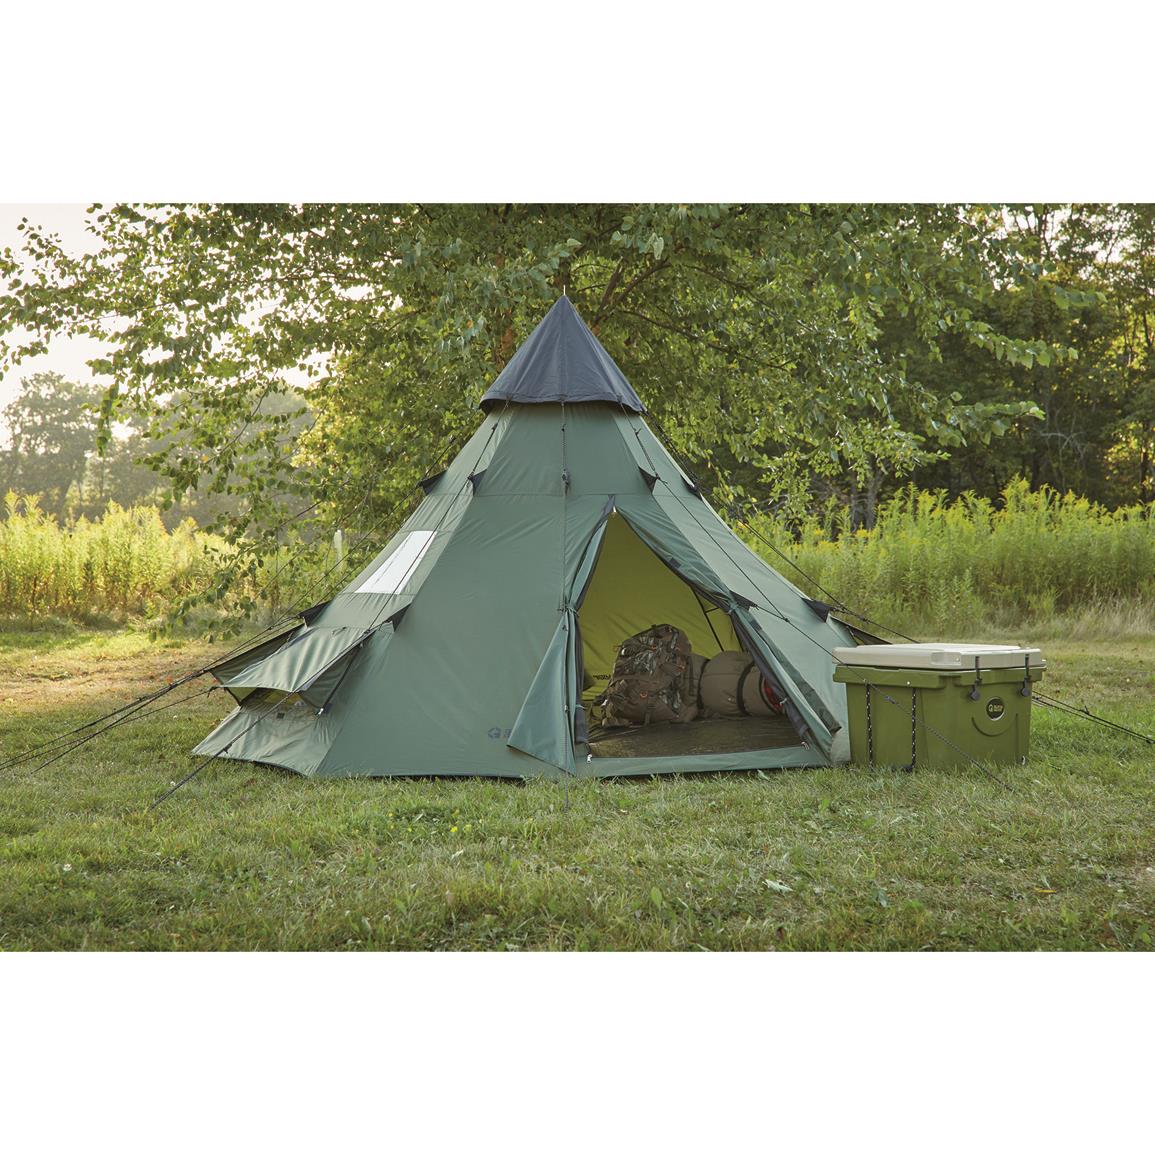 Best Choice Products 10x10 Teepee Camping Tent Family Outdoor Sleeping Dome W// Carry Bag